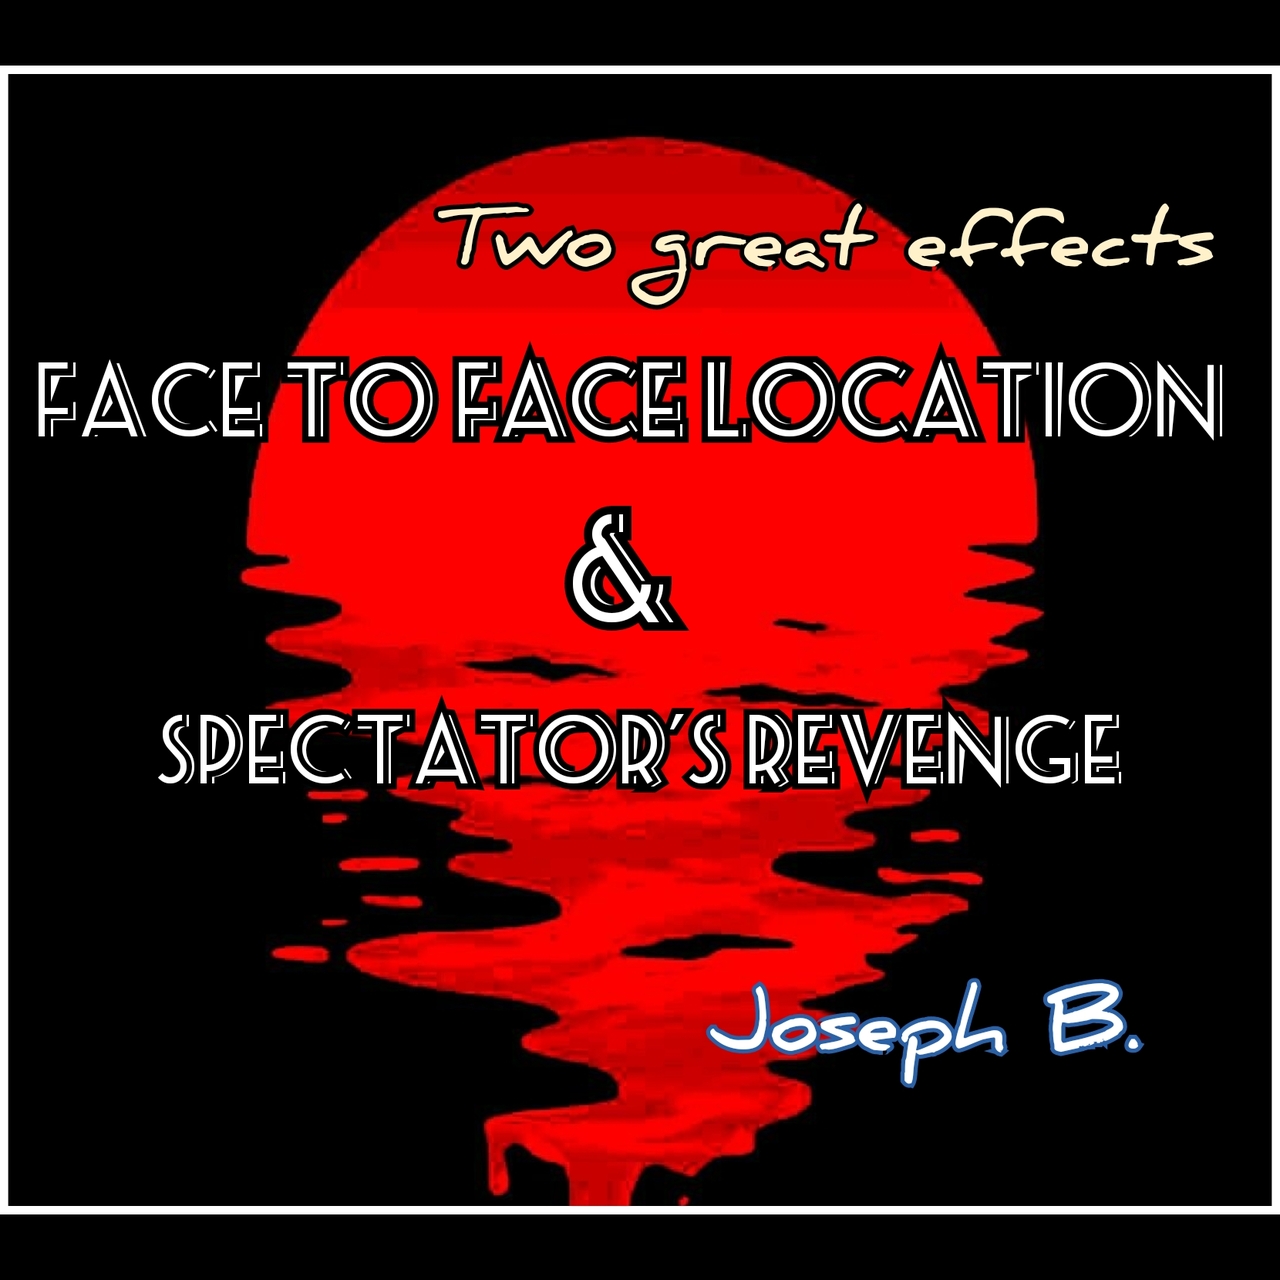 Face to Face Location & Spectator's Revenge by Joseph B. (MP4 Video Download 720p High Quality)